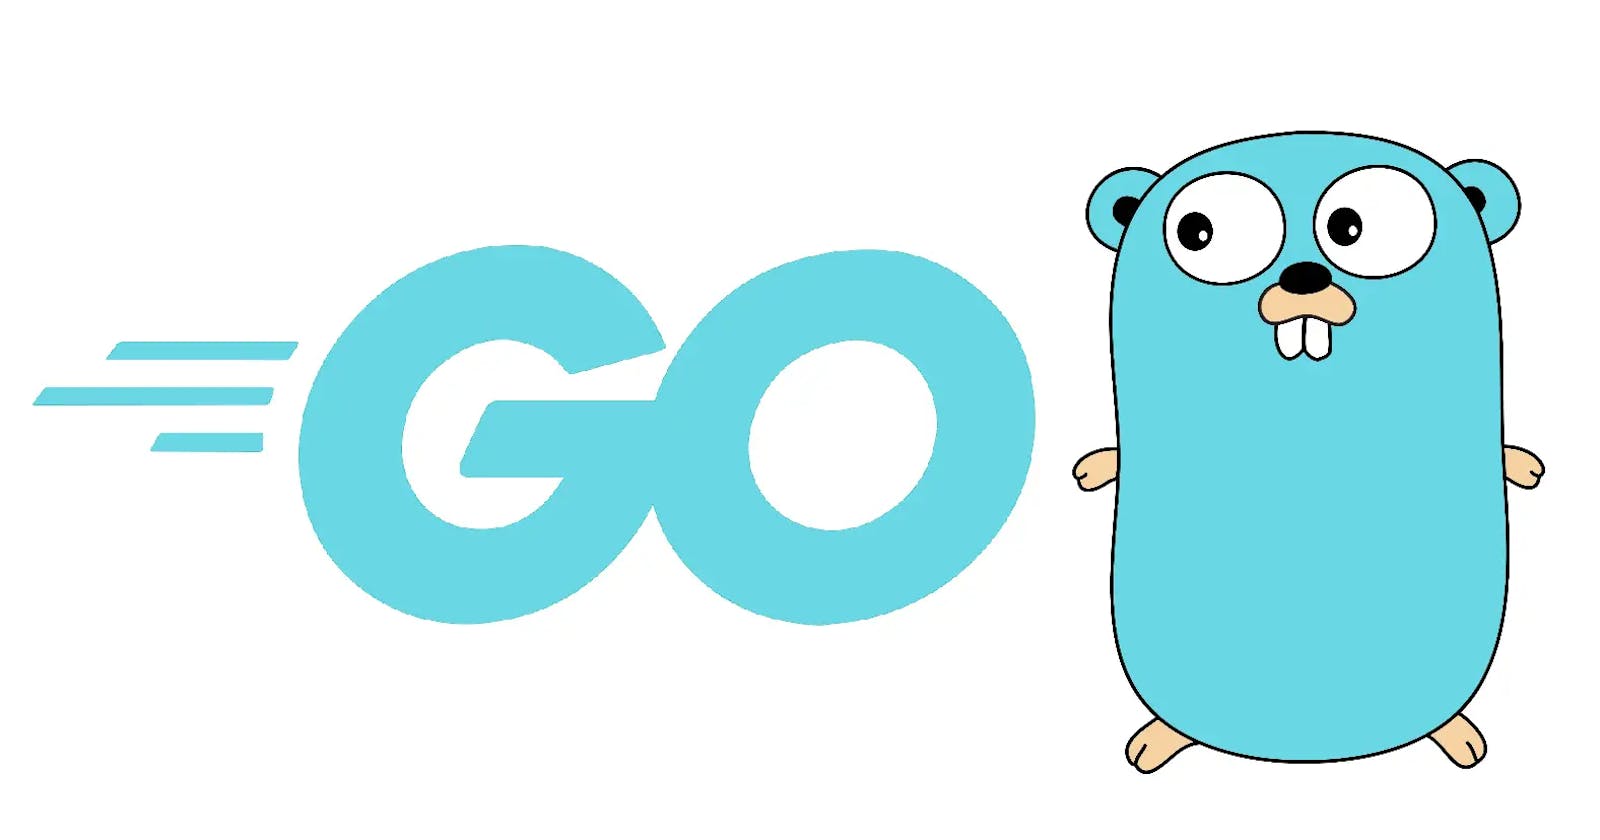 A Quirk Regarding Type Assertions and Switch Statements in Go